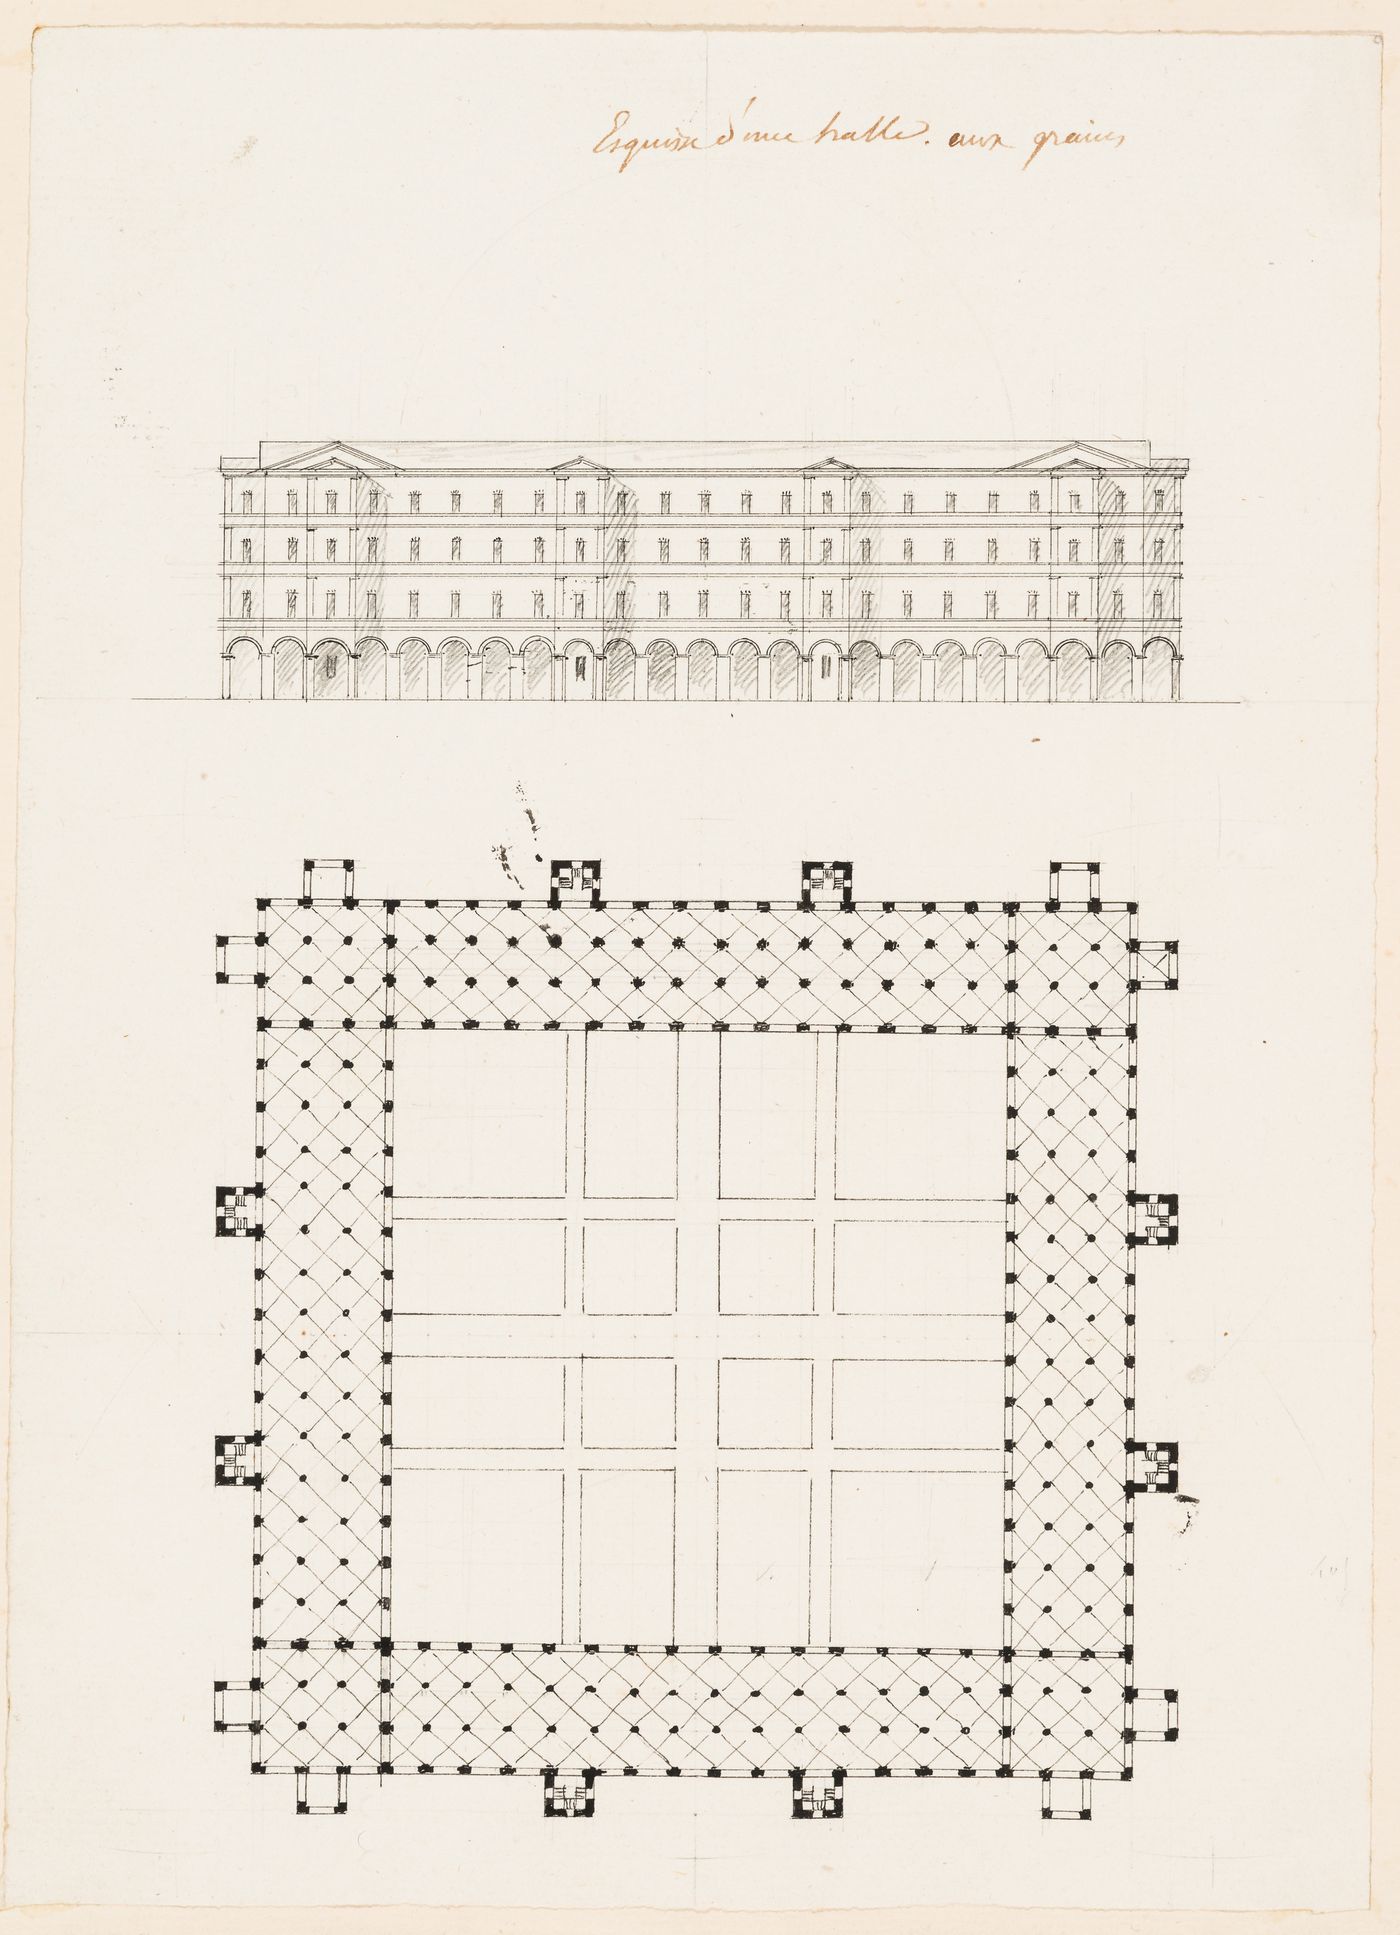 Plan and elevation for a tobacco factory; Plan and elevation for an inn stable; Esquisse showing an elevation and plan for a halle aux grains